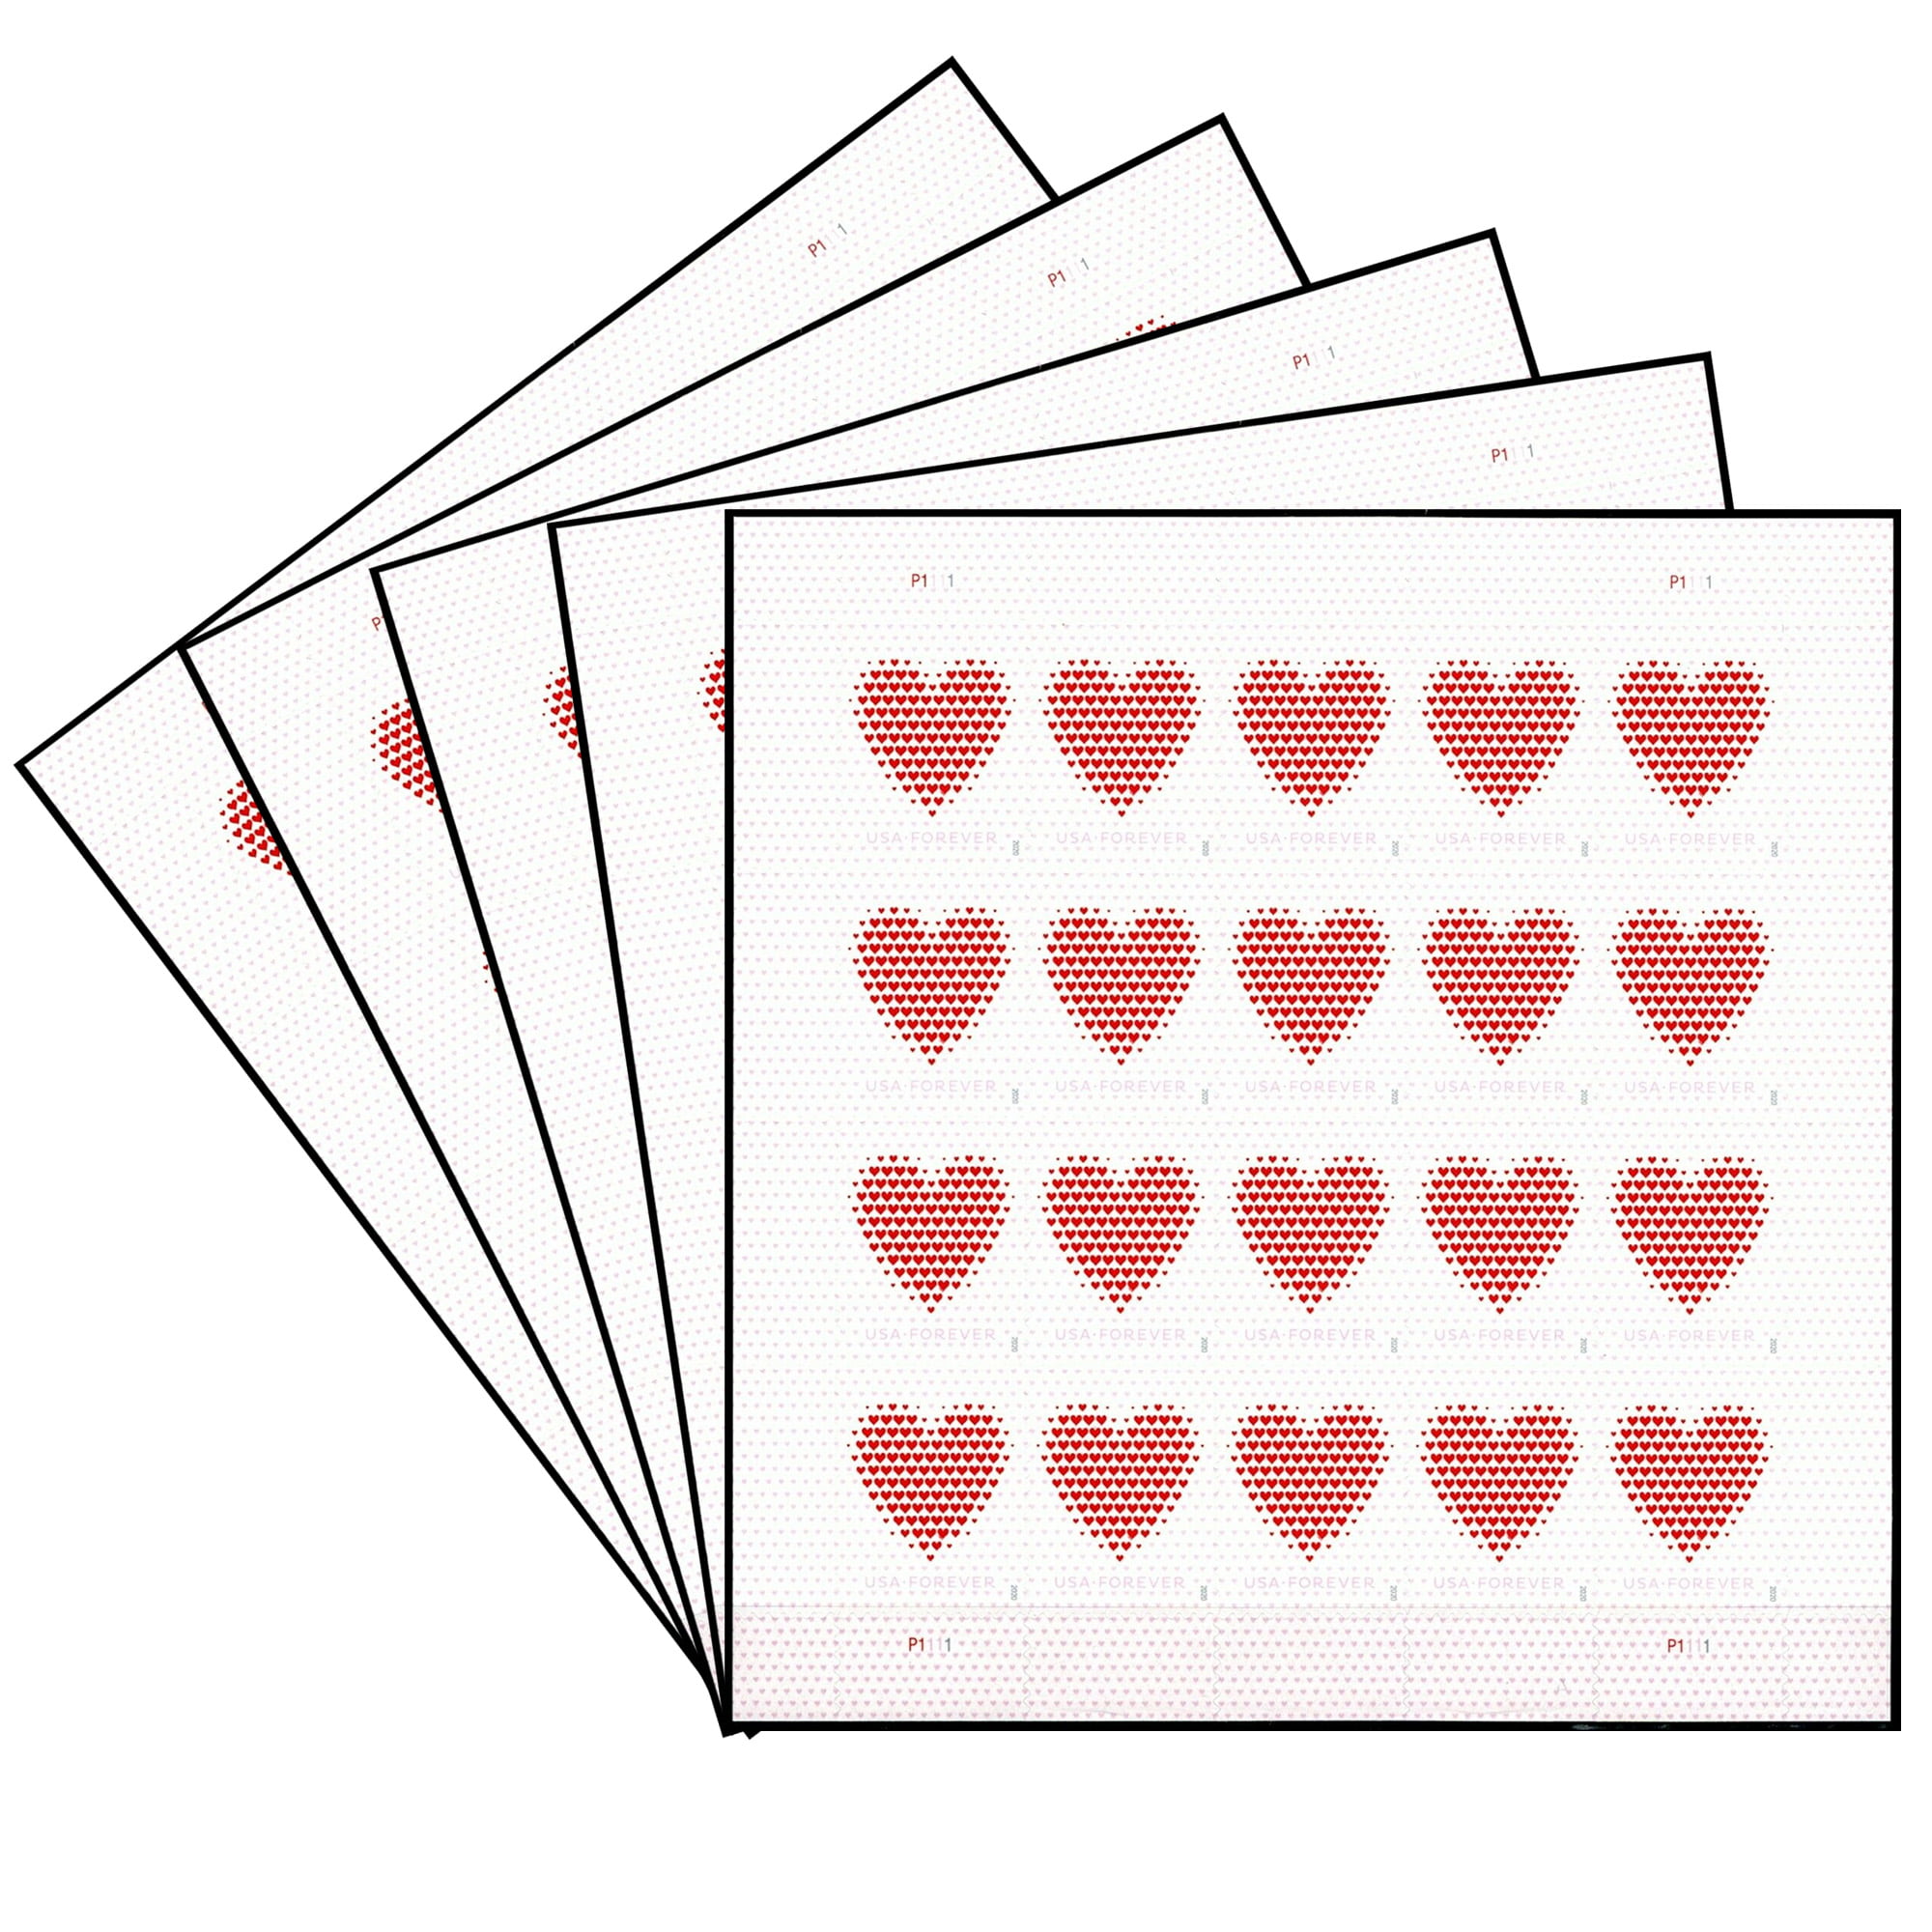 100 5 sheets of 20      100 stamps total USPS Hearts Blossom Forever Stamps